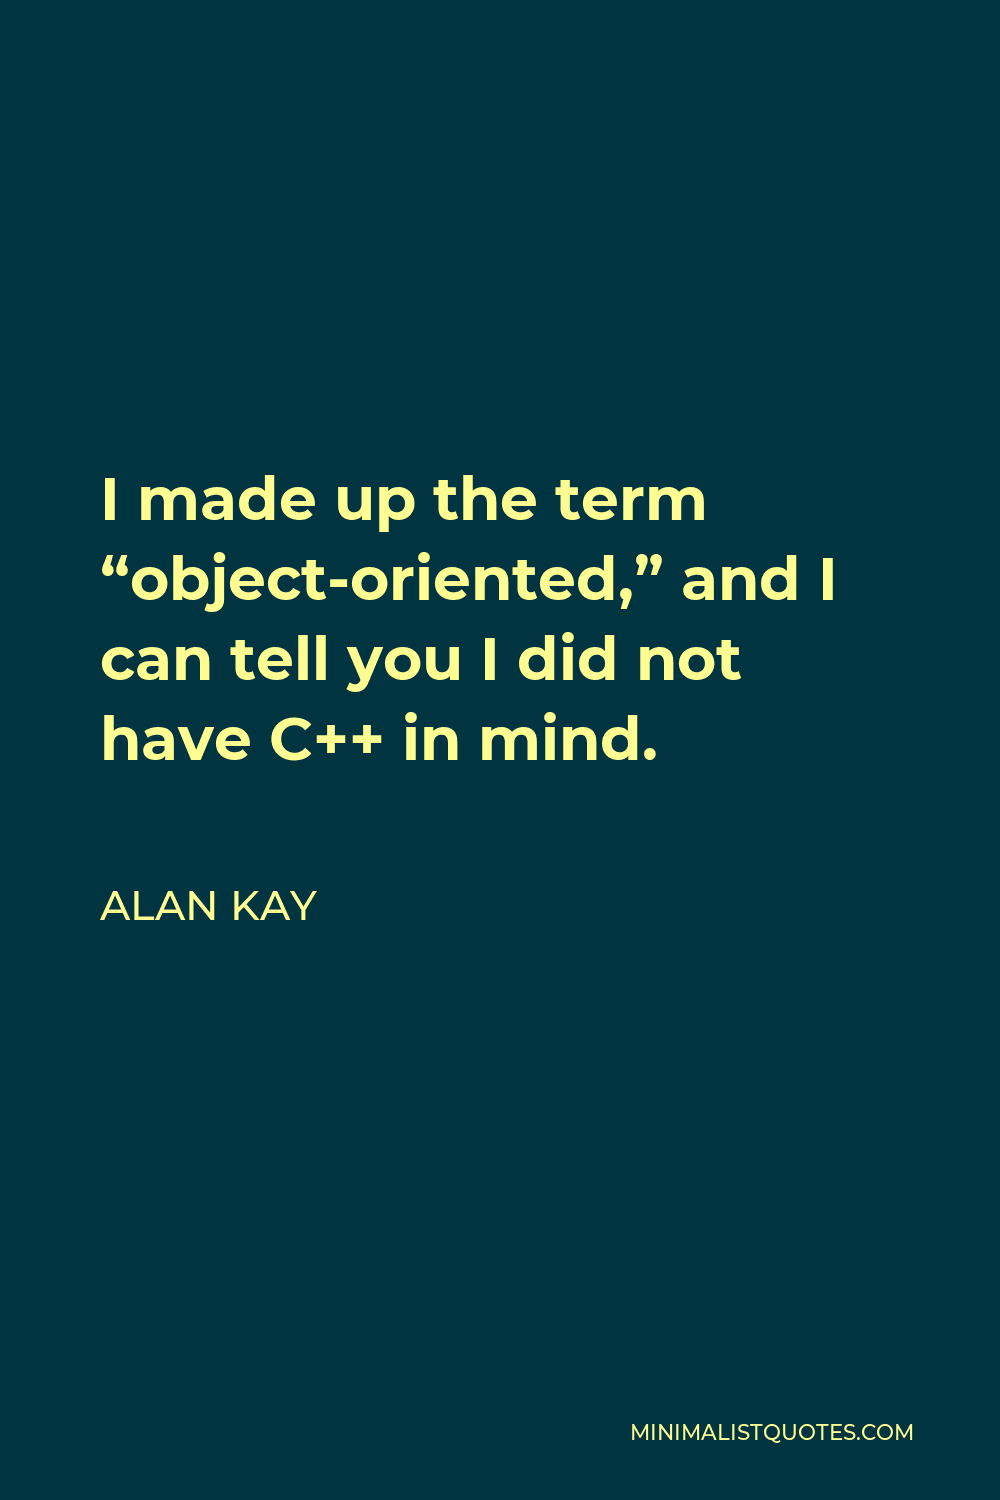 Alan Kay Quote - I made up the term “object-oriented,” and I can tell you I did not have C++ in mind.